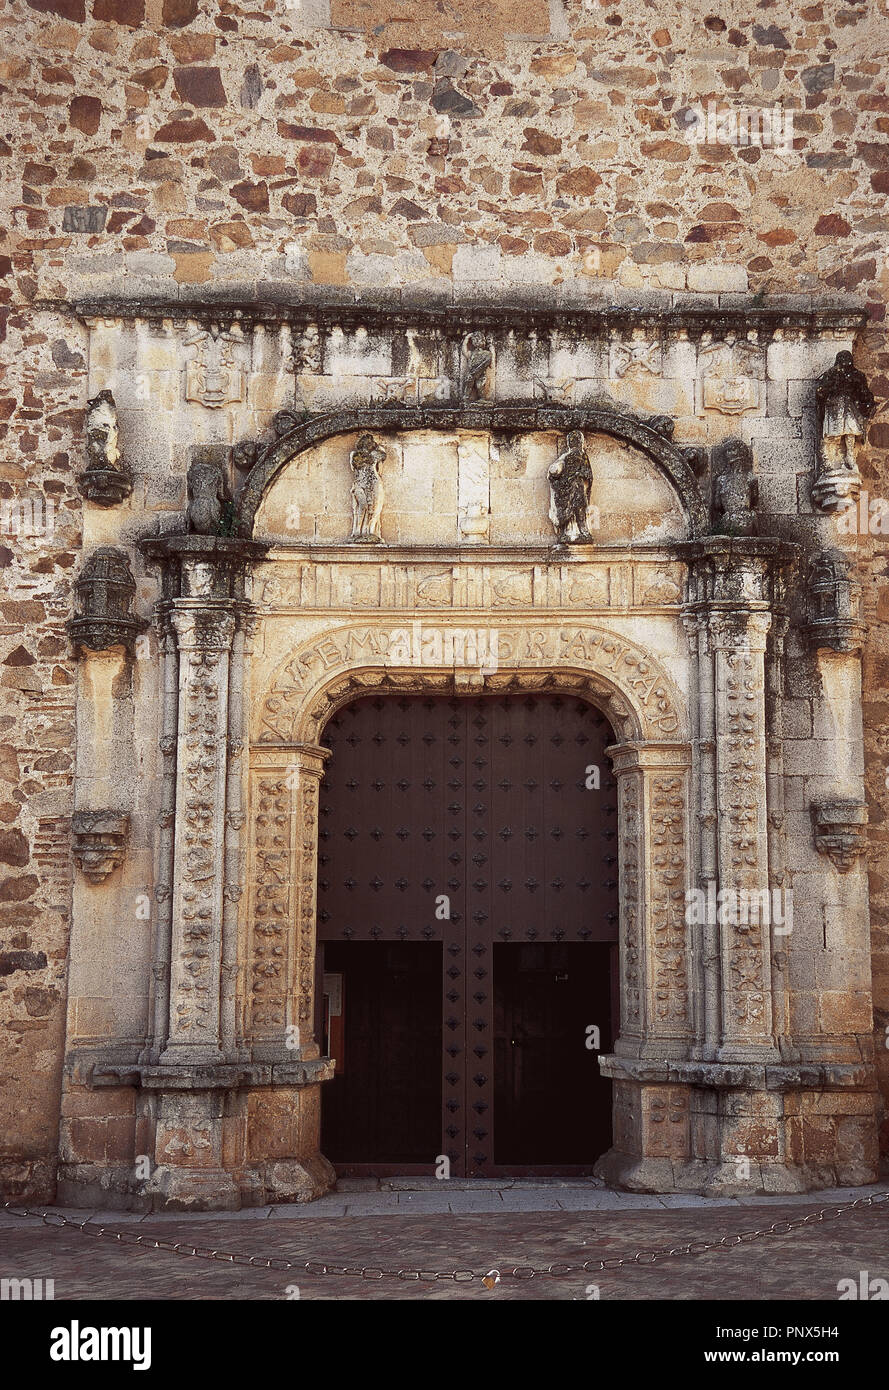 Spain. Extremadura. Almendralejo. Plateresque portal of the Parish of Our Lady of Purification (16th century). Stock Photo